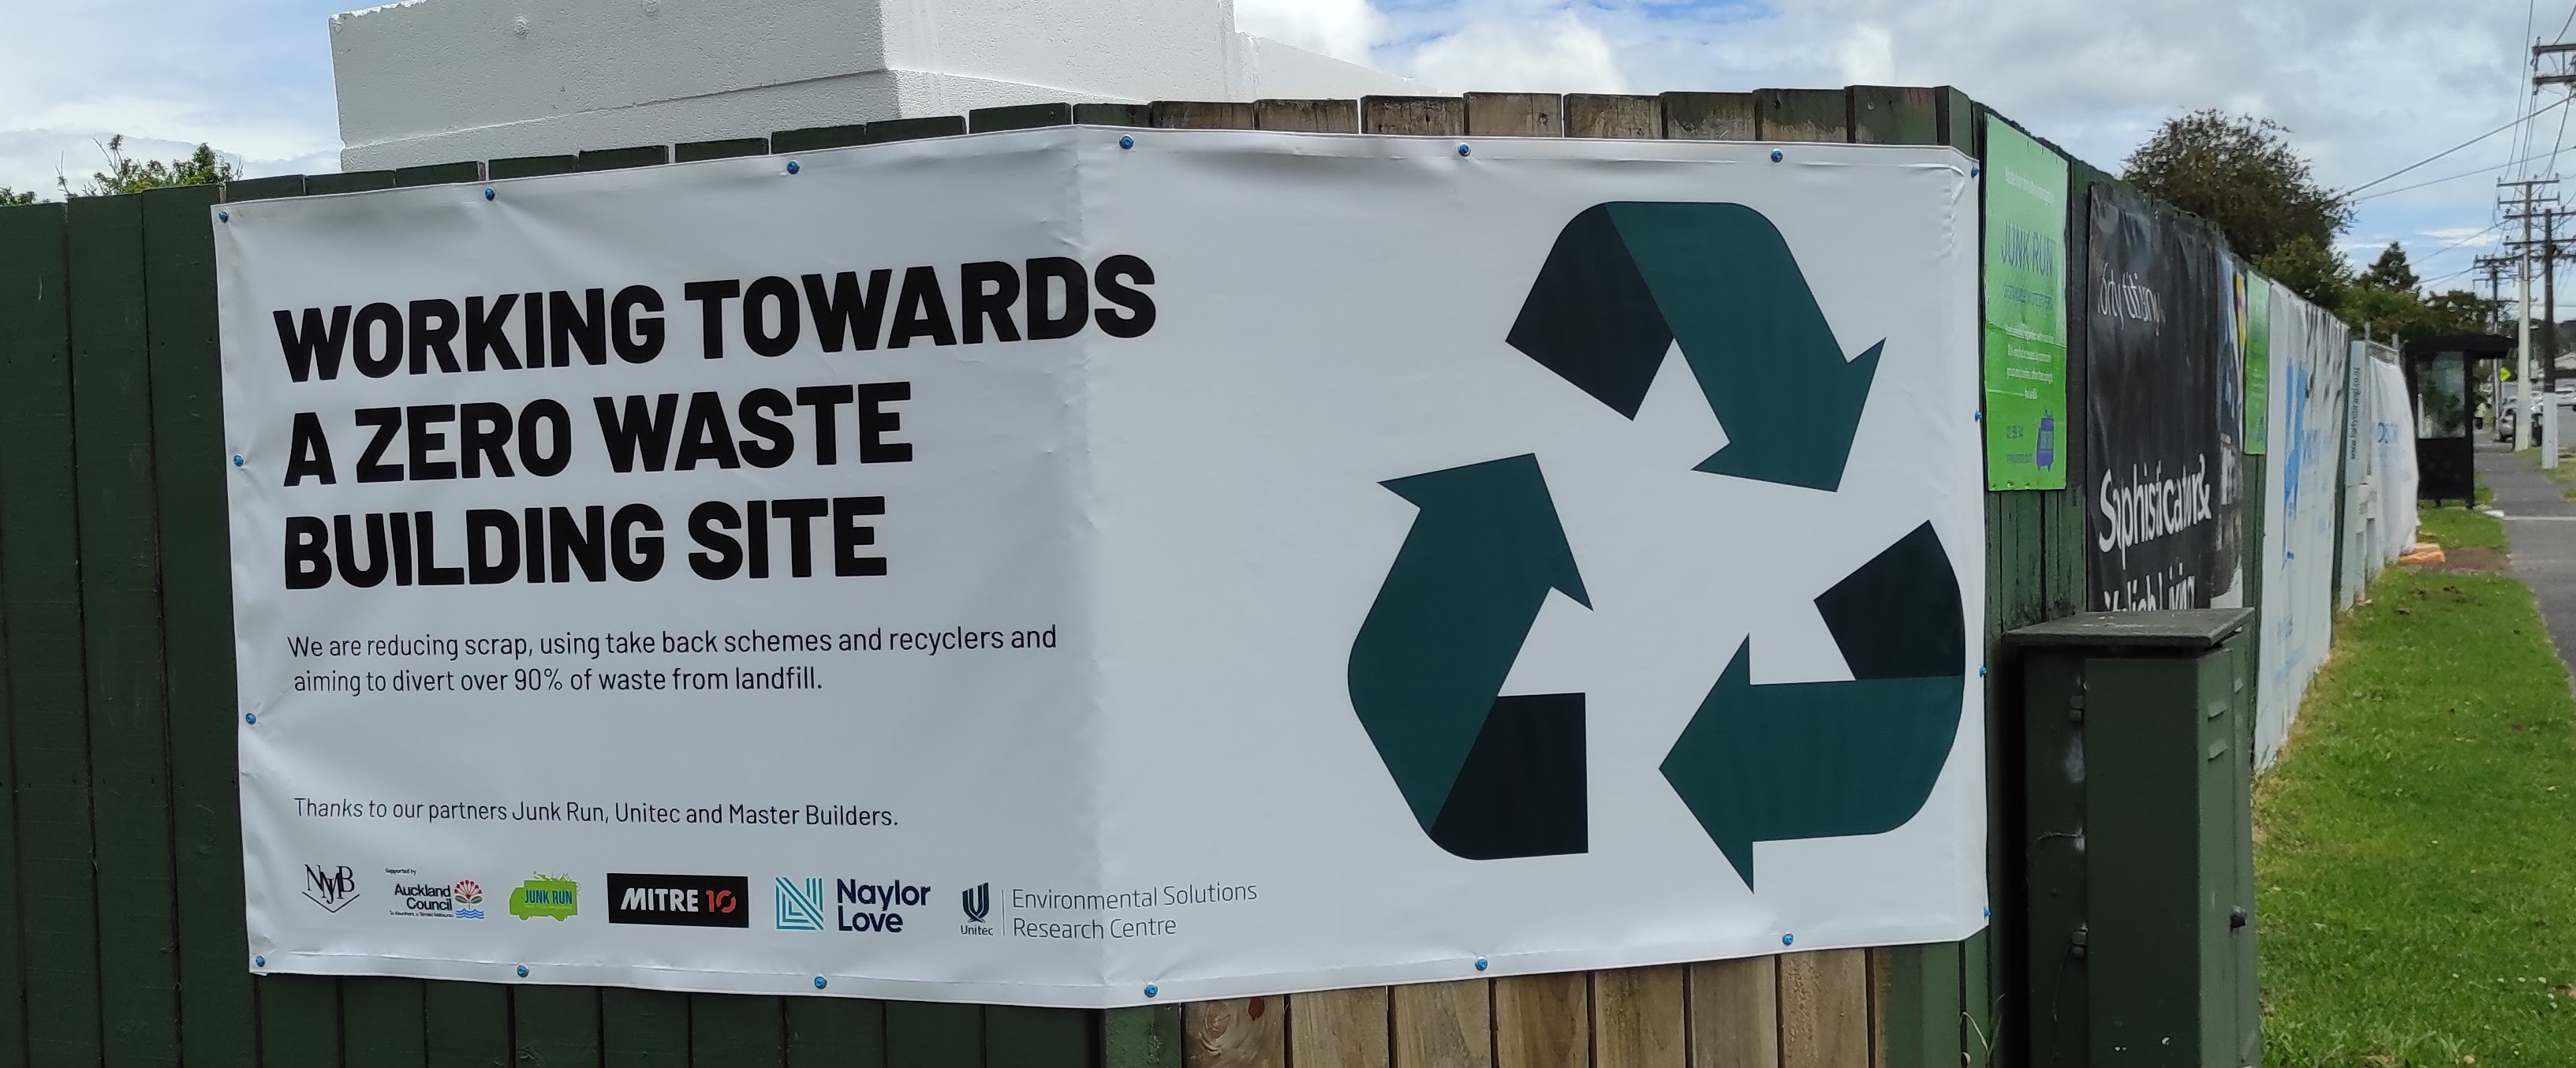 working towards a zero waste building site signage